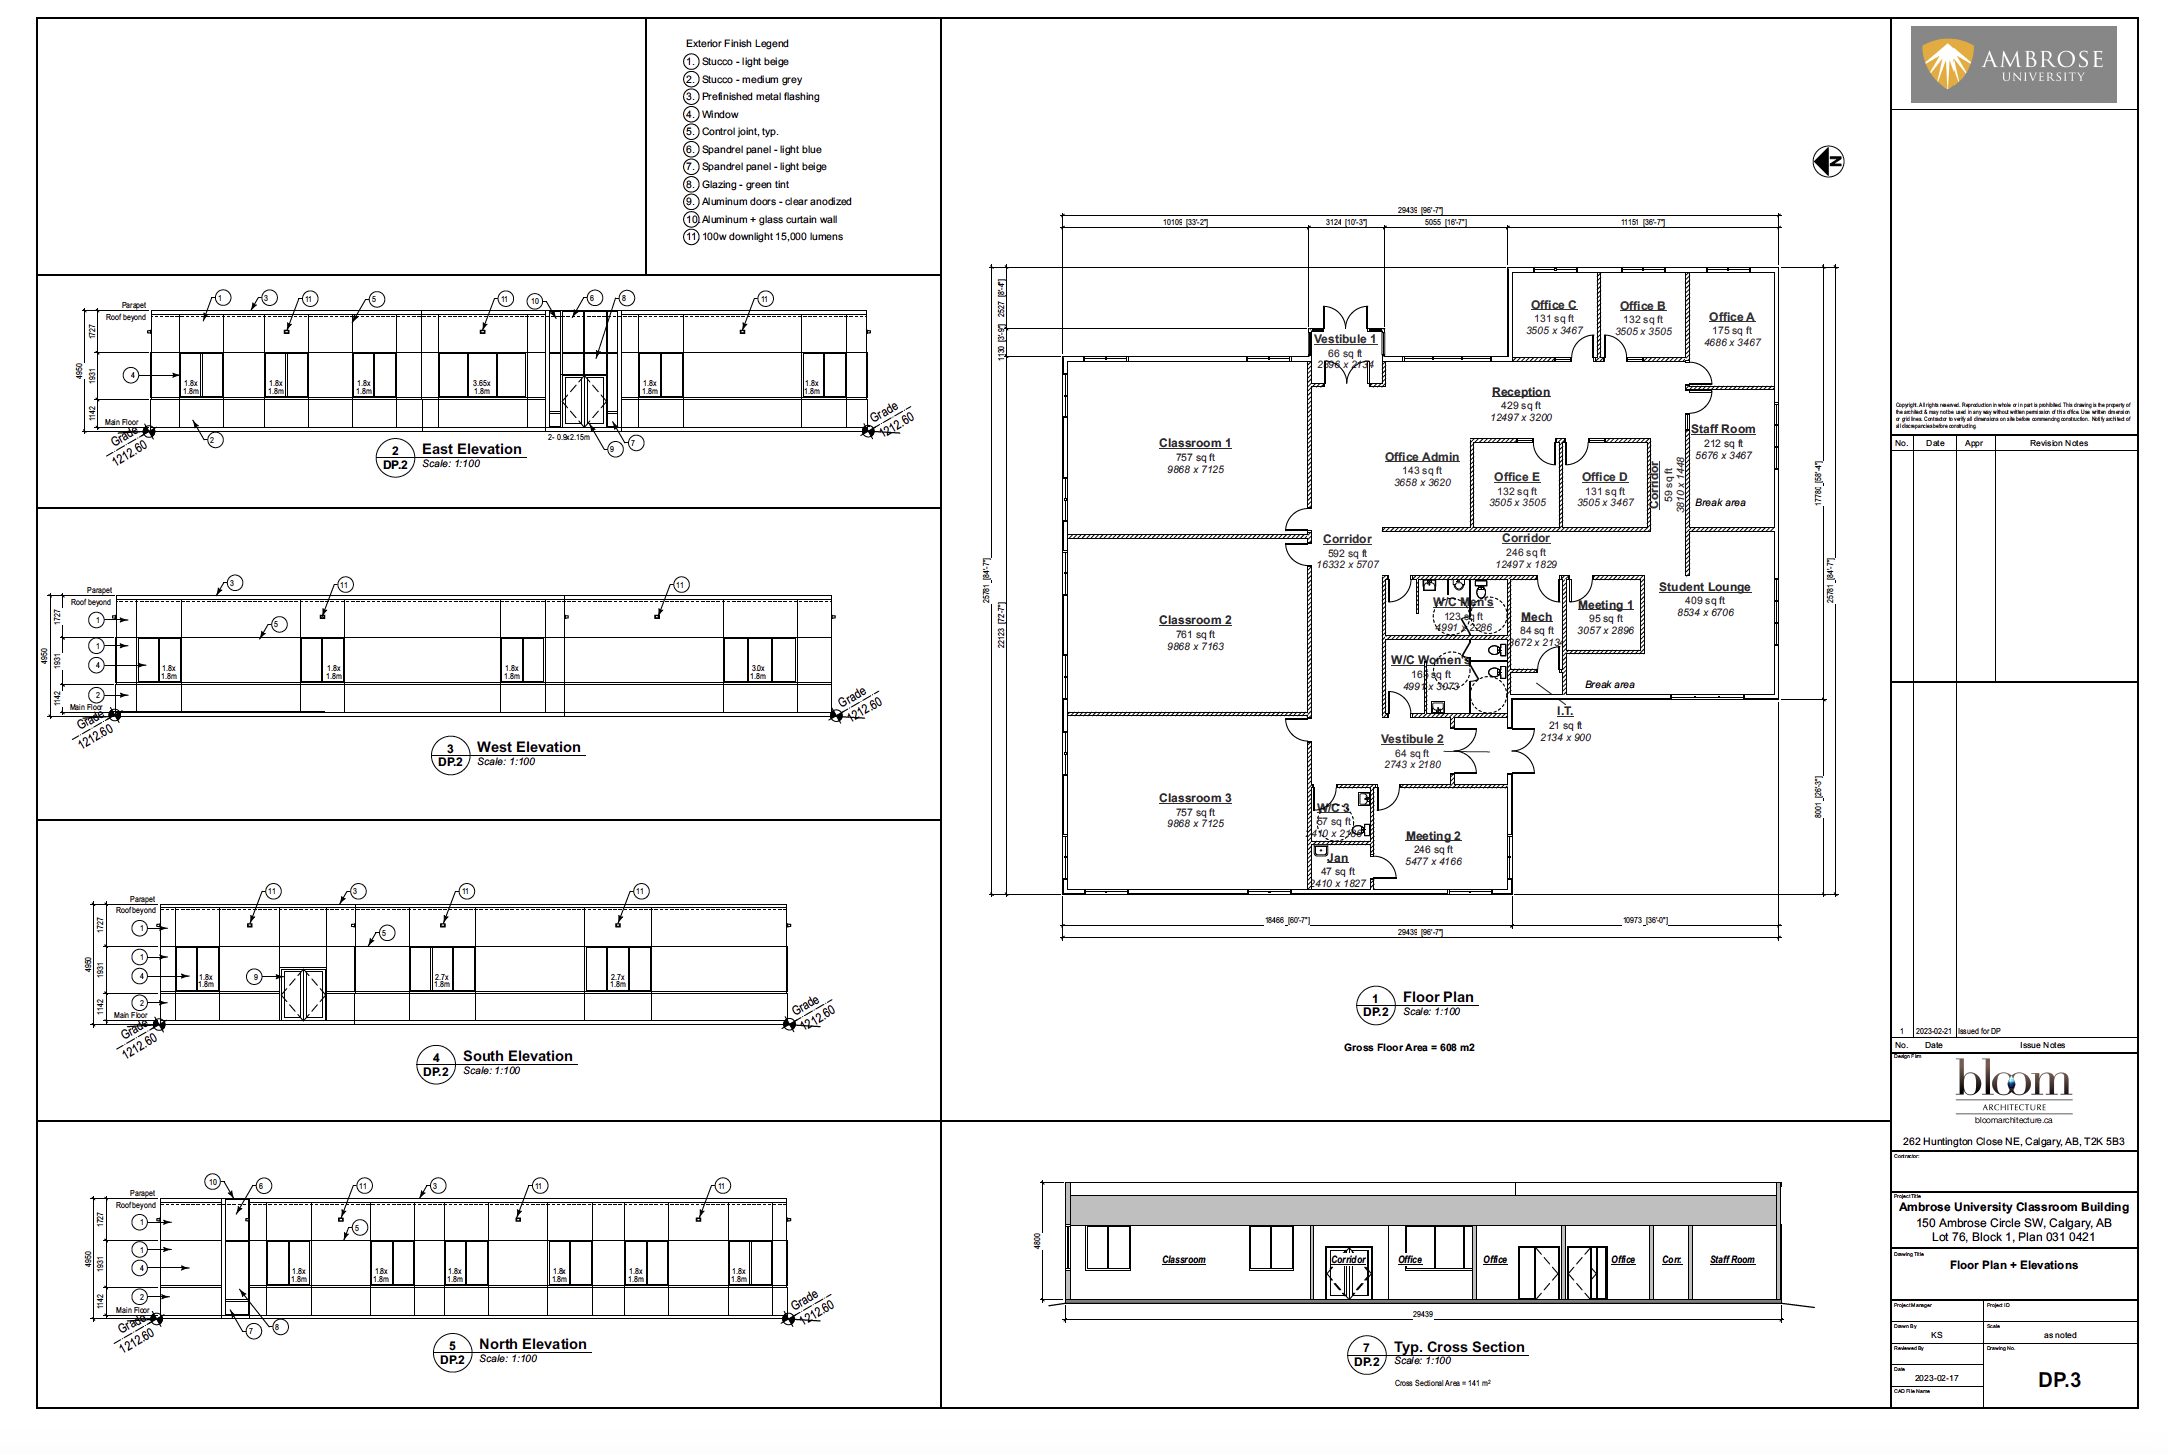 Proposed floorplan for School of Business expansion project